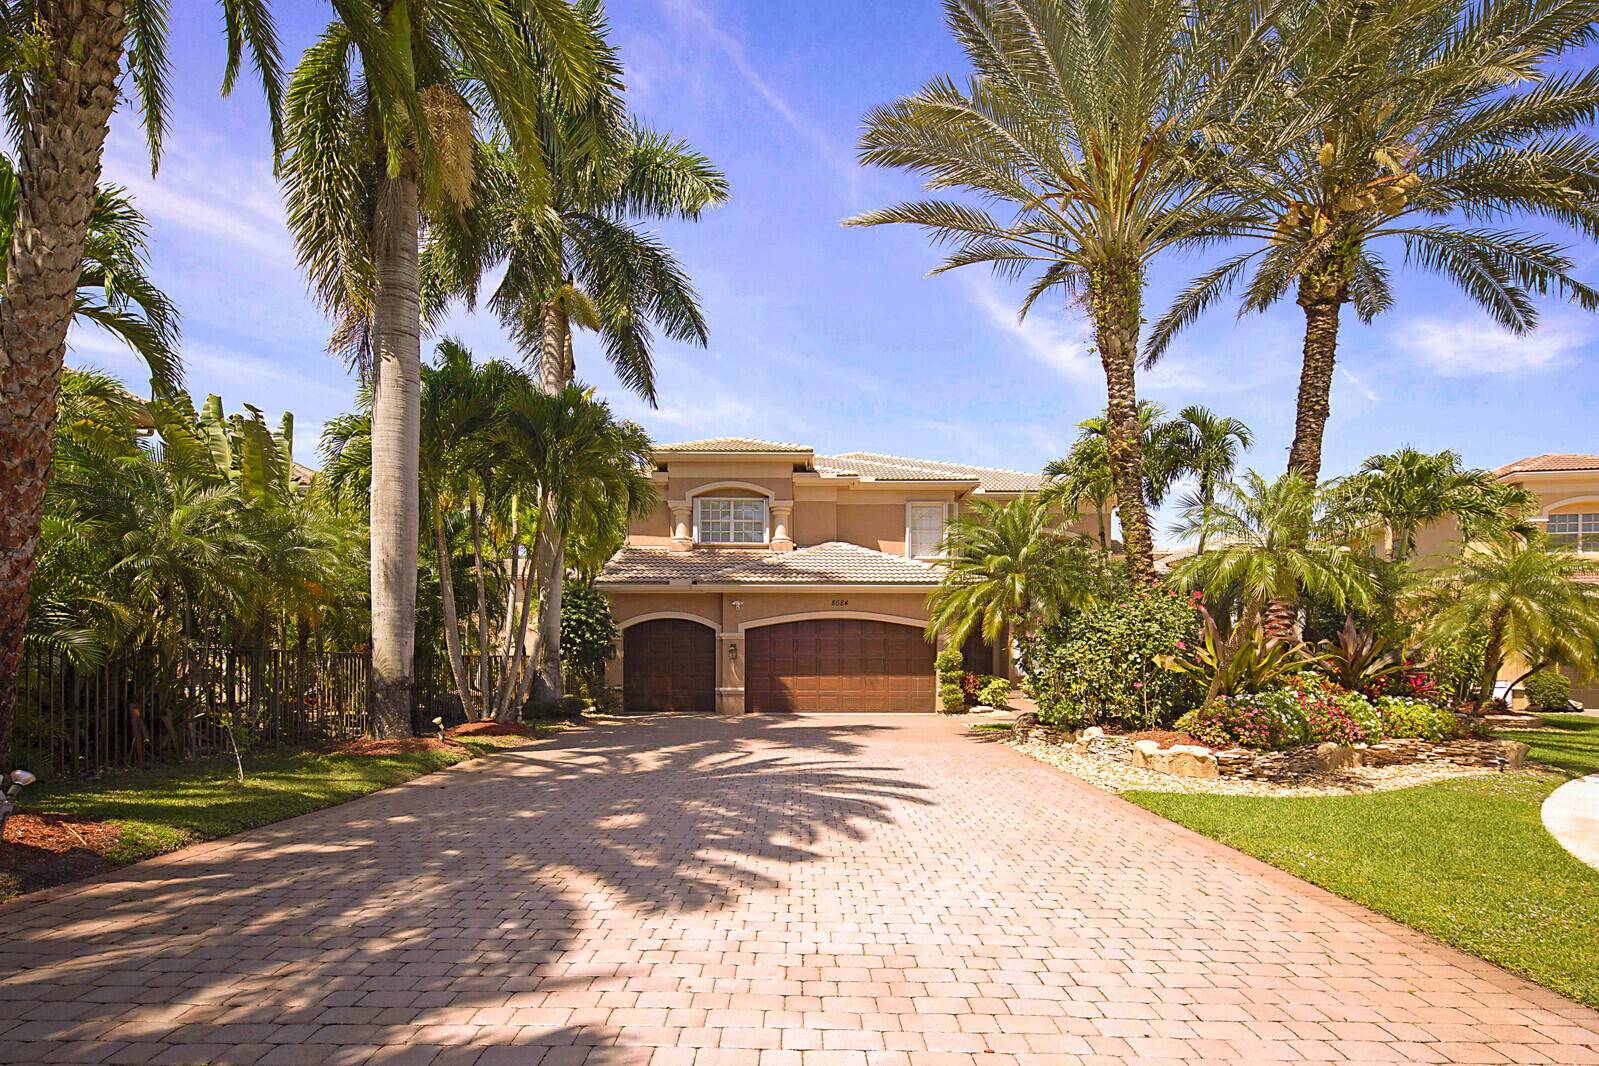 Welcome to this exquisite waterfront pool home situated on a serene cul de sac with an expansive driveway.